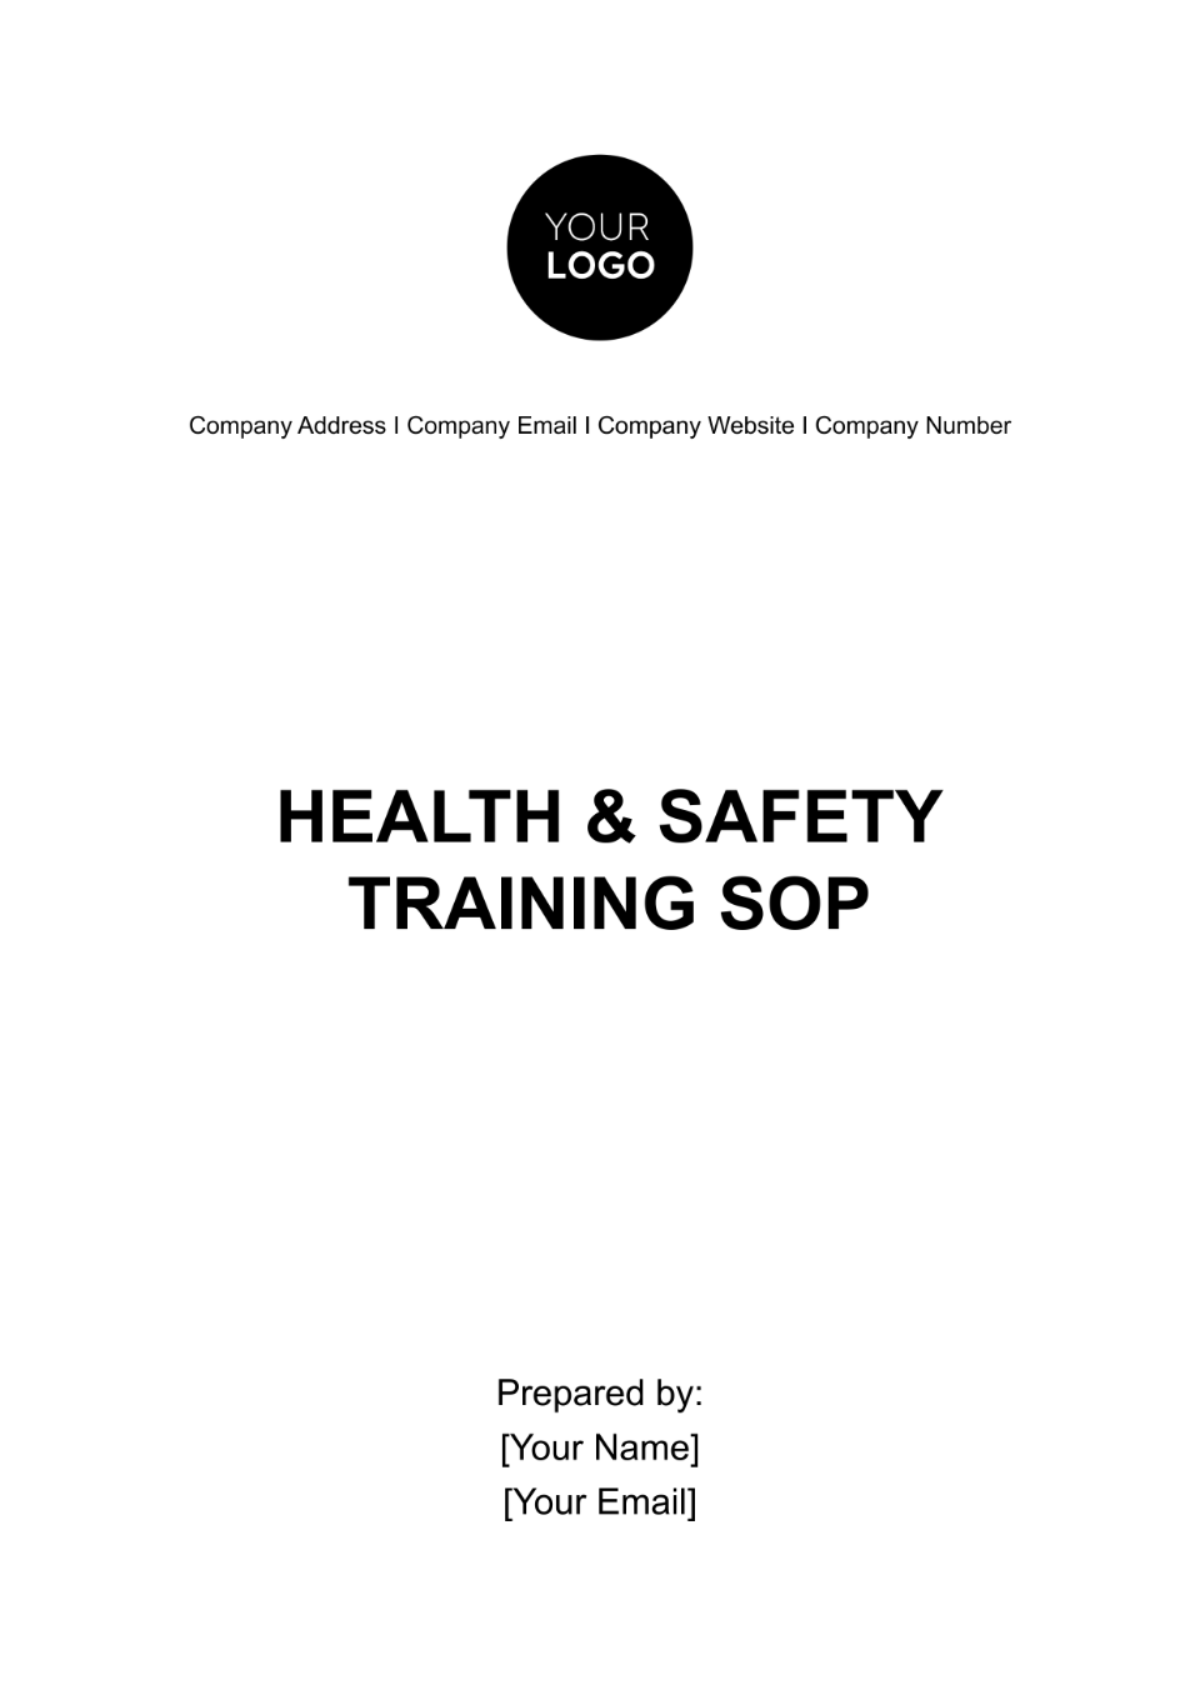 Health & Safety Training SOP Template